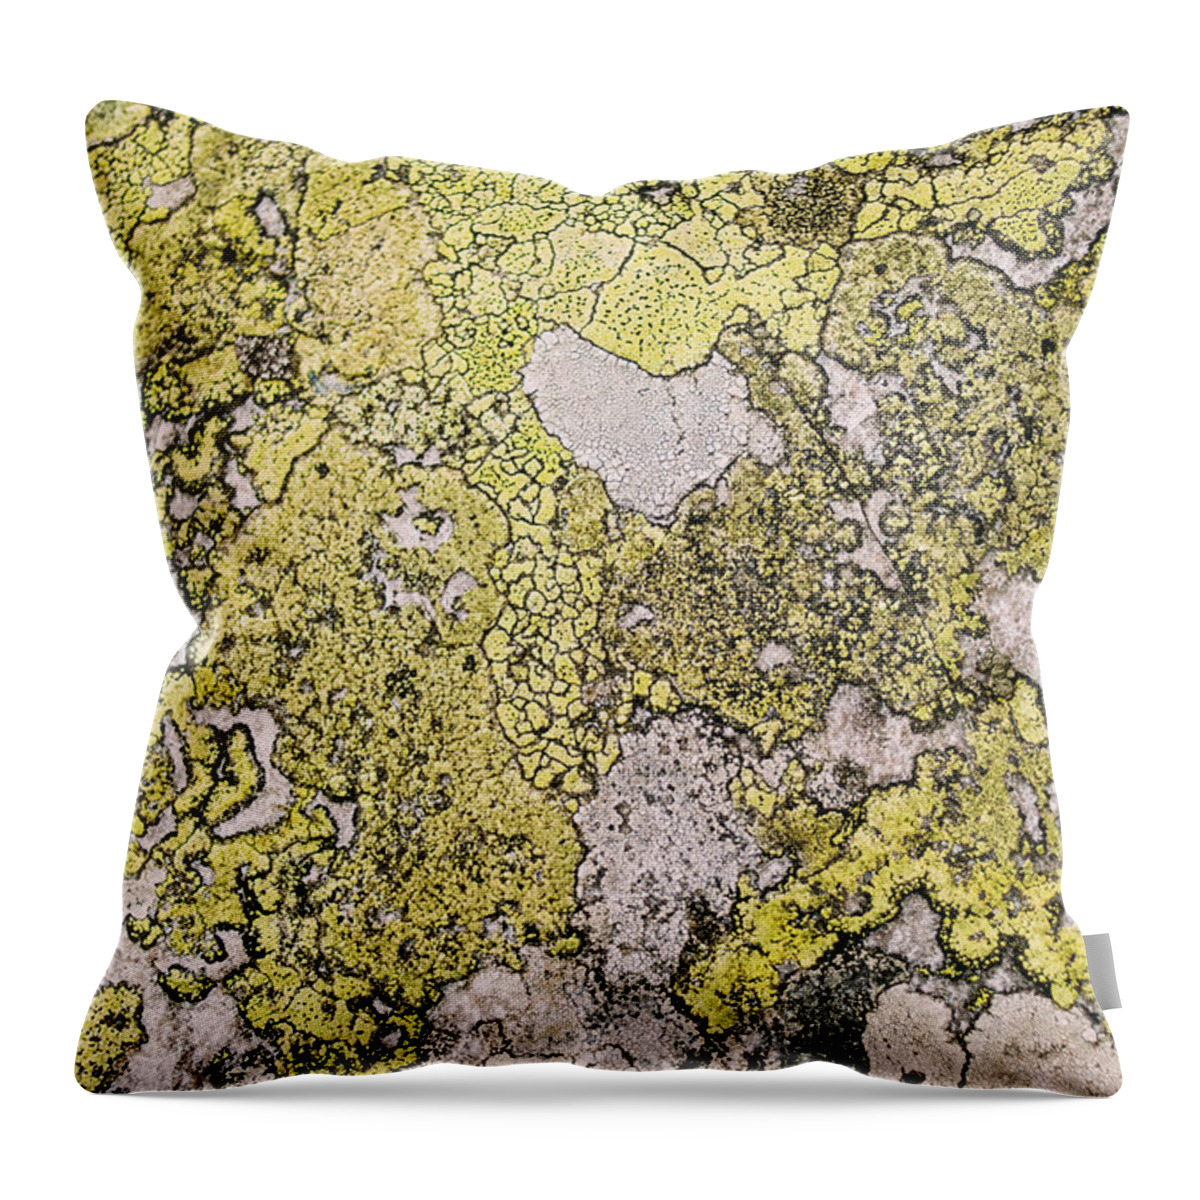 Natural Pattern Throw Pillow featuring the photograph Green Moss On Rock Pattern by Pati Photography